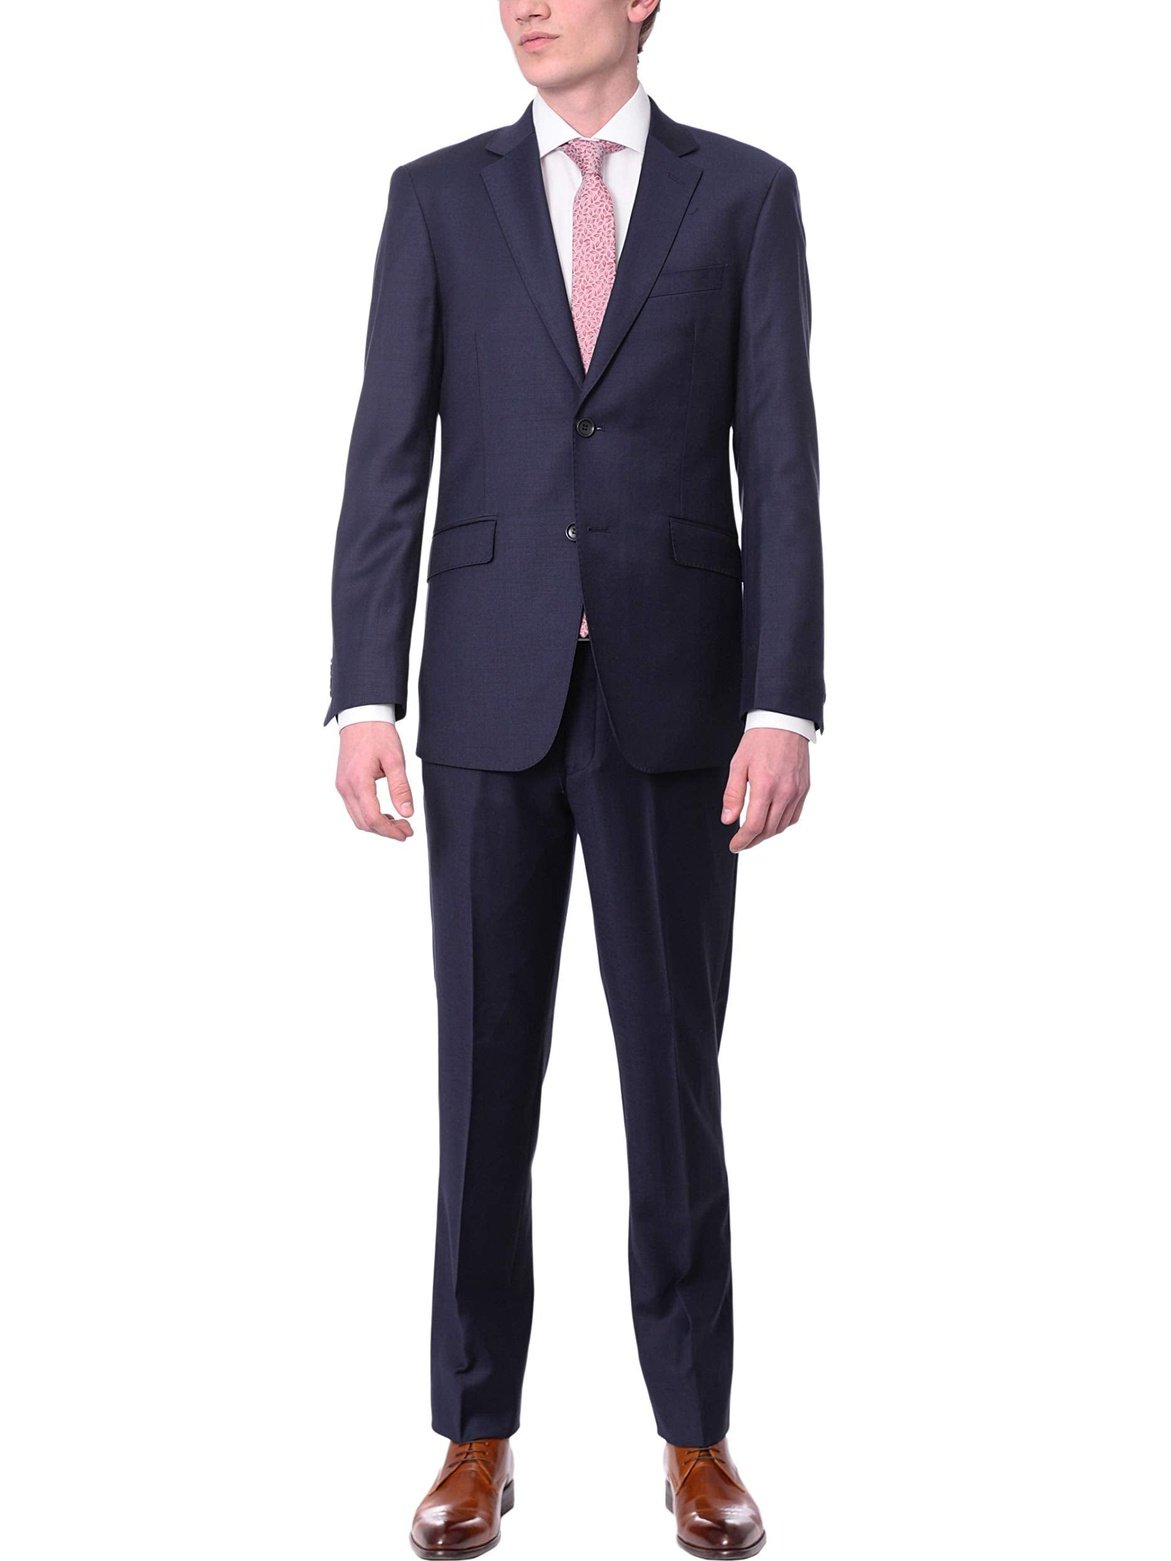 Extra Slim Fit Suit Super Ultra Skinny Tapered European Suit